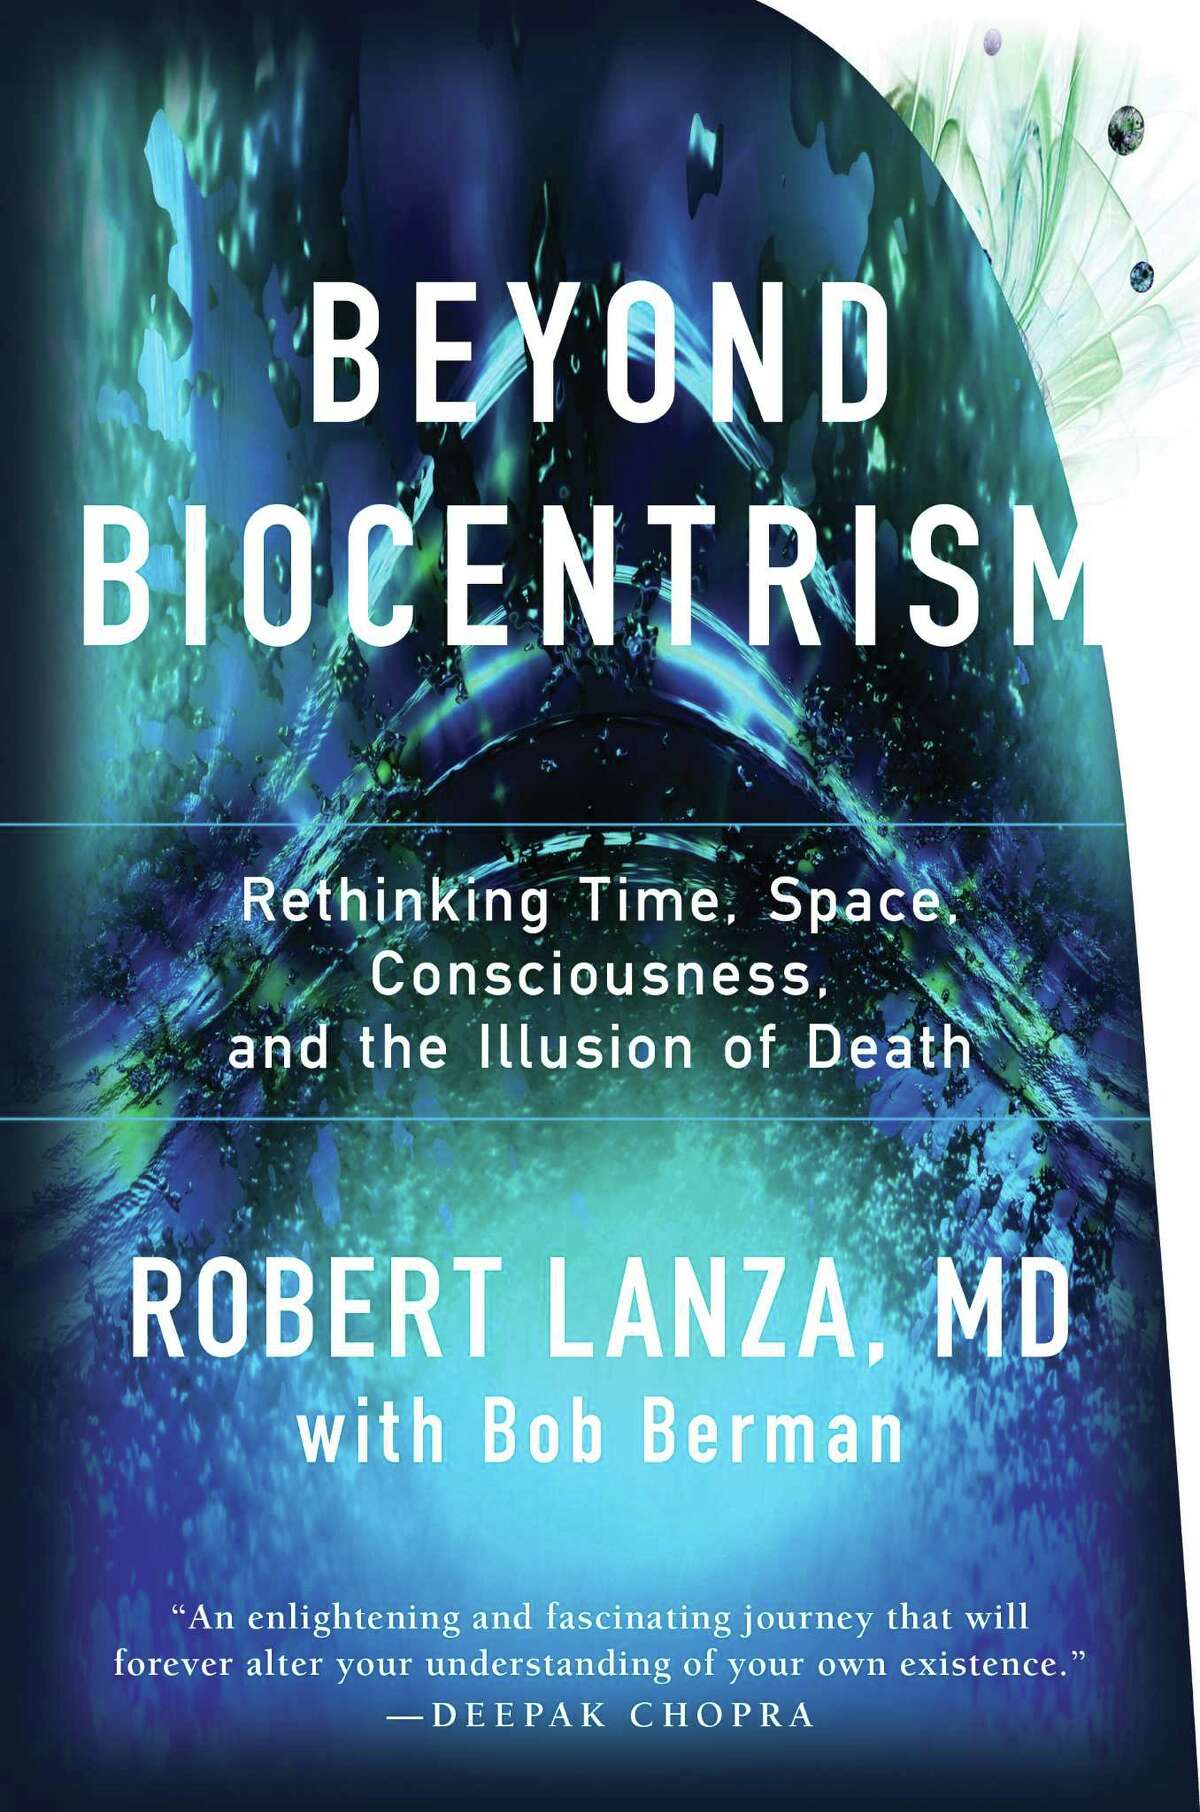 "Beyond Biocentrism: Rethinking Time, Space, Consciousness and the Illusion of Death" challenges the reader to accept the implications of the latest scientific findings in fields ranging from plant biology and cosmology to quantum entanglement and consciousness.